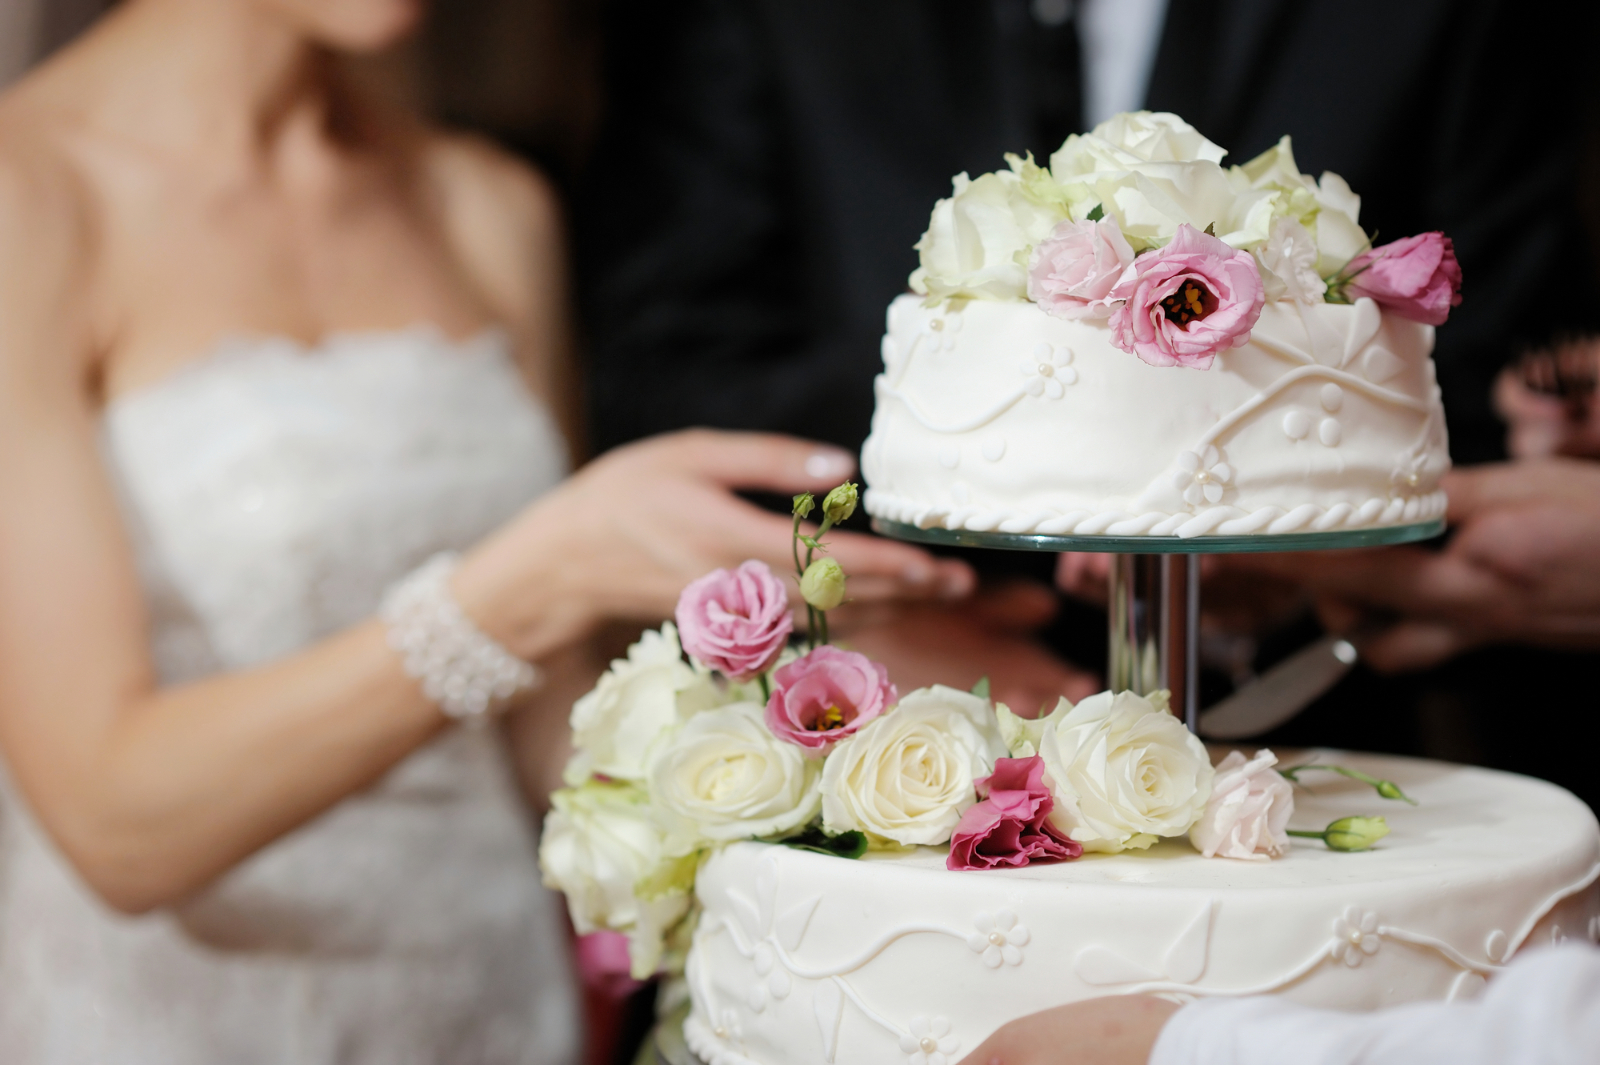 5 Wedding Traditions to Consider